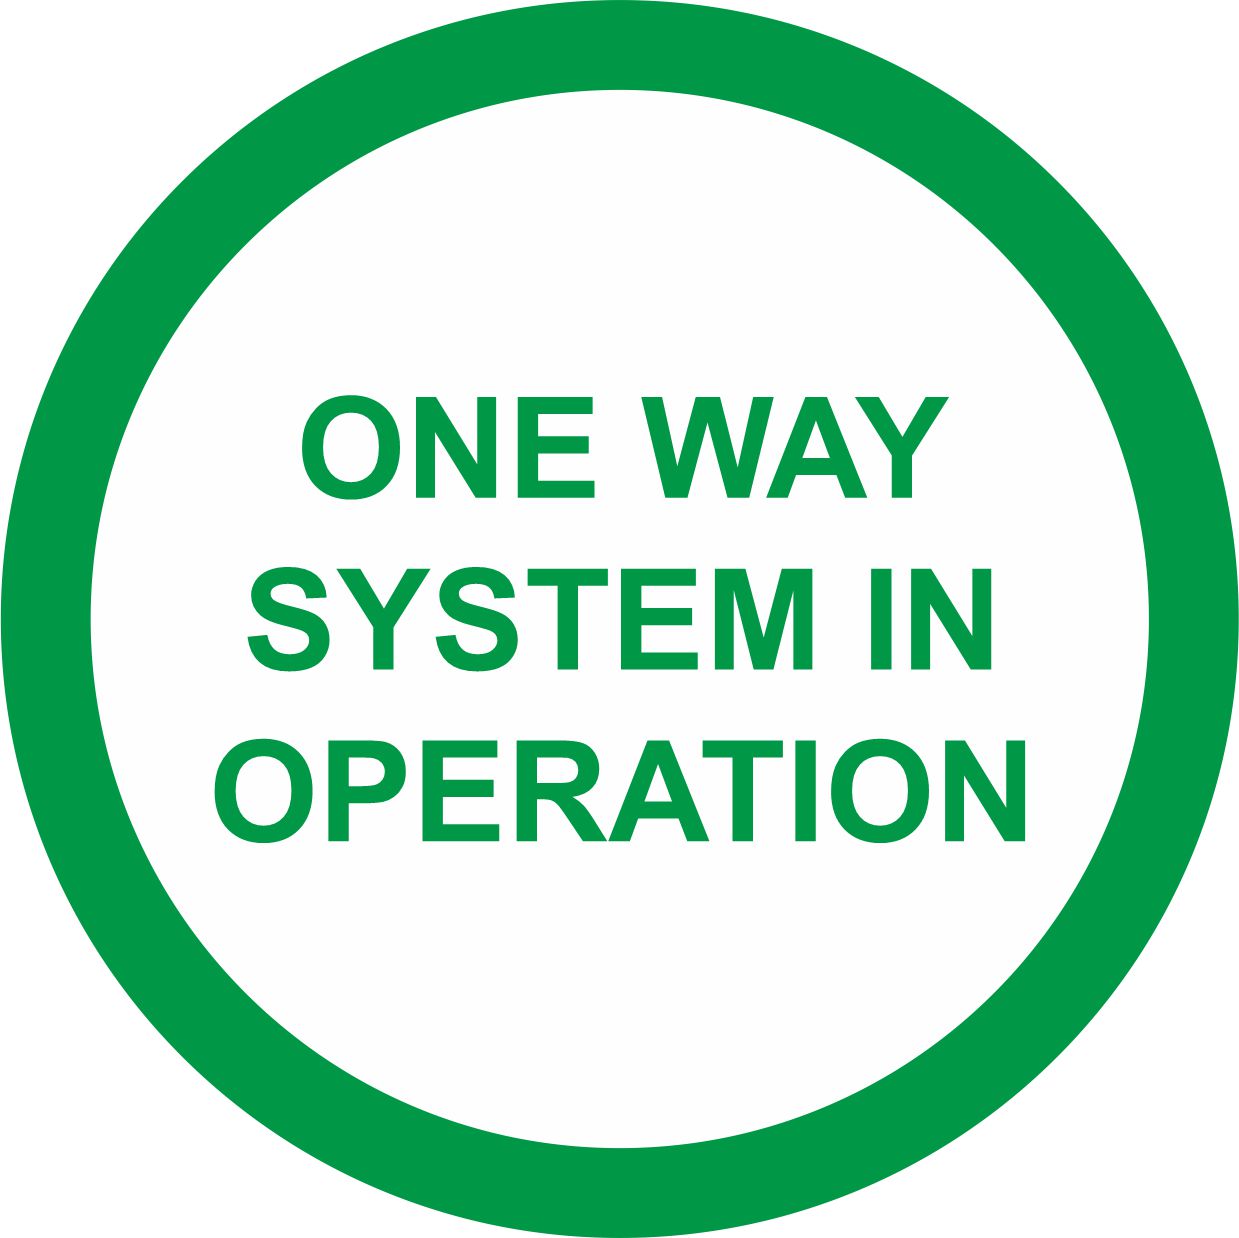 FLOOR STICKER - ONE WAY SYSTEM IN OPERATION  - COVID 19 SOCIAL DISTANCING